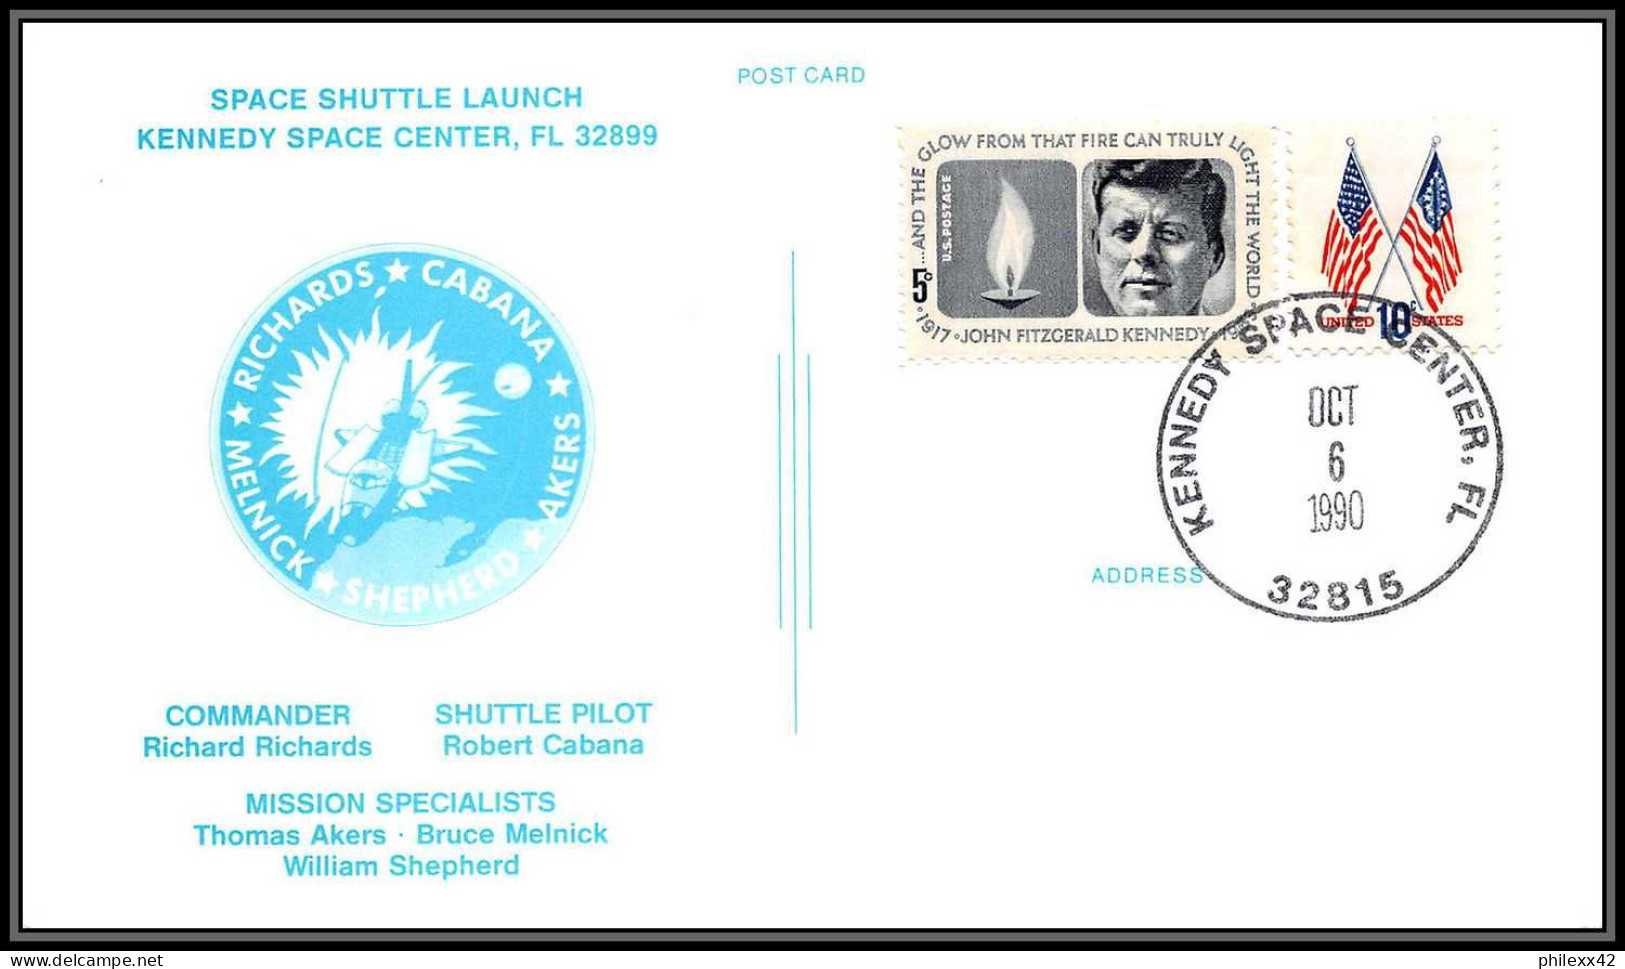 1843 Espace (space Raumfahrt) Lettre (cover Briefe) USA Start STS 41 Discovery Shuttle (navette) 6/10/1990 - USA